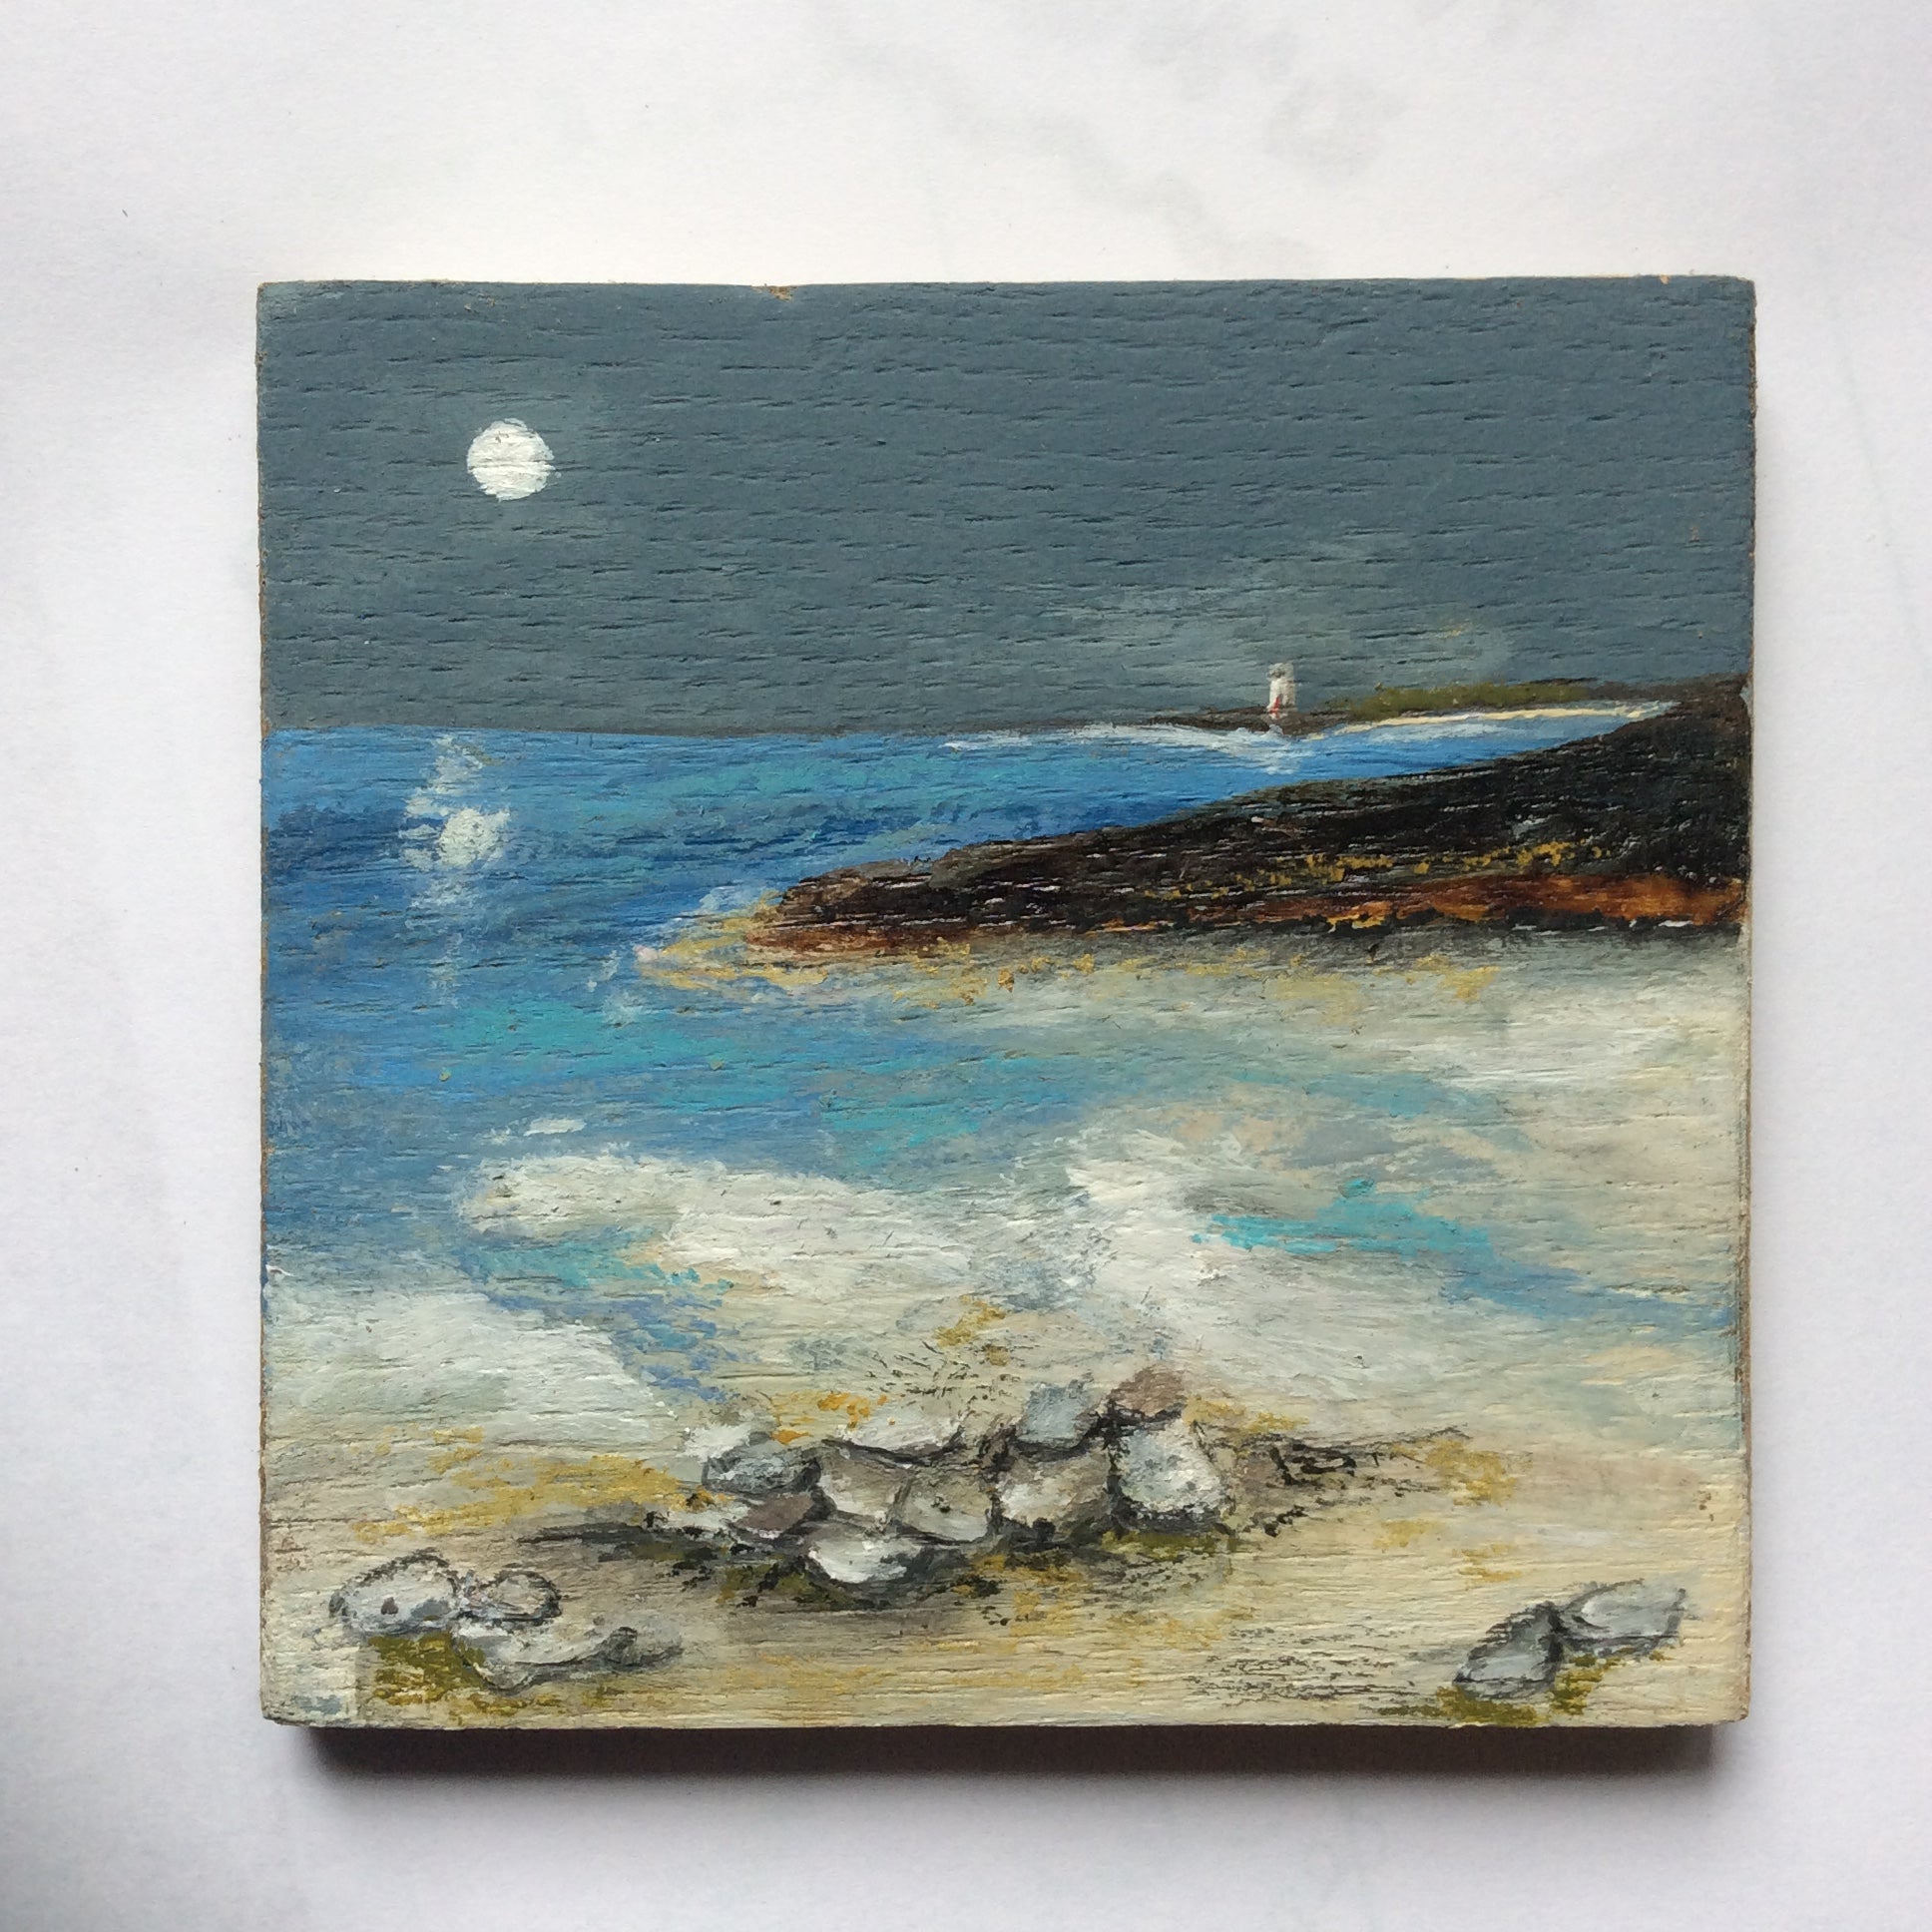 Mixed Media Art on wood By Louise O'Hara - "A lighthouse in the distance”